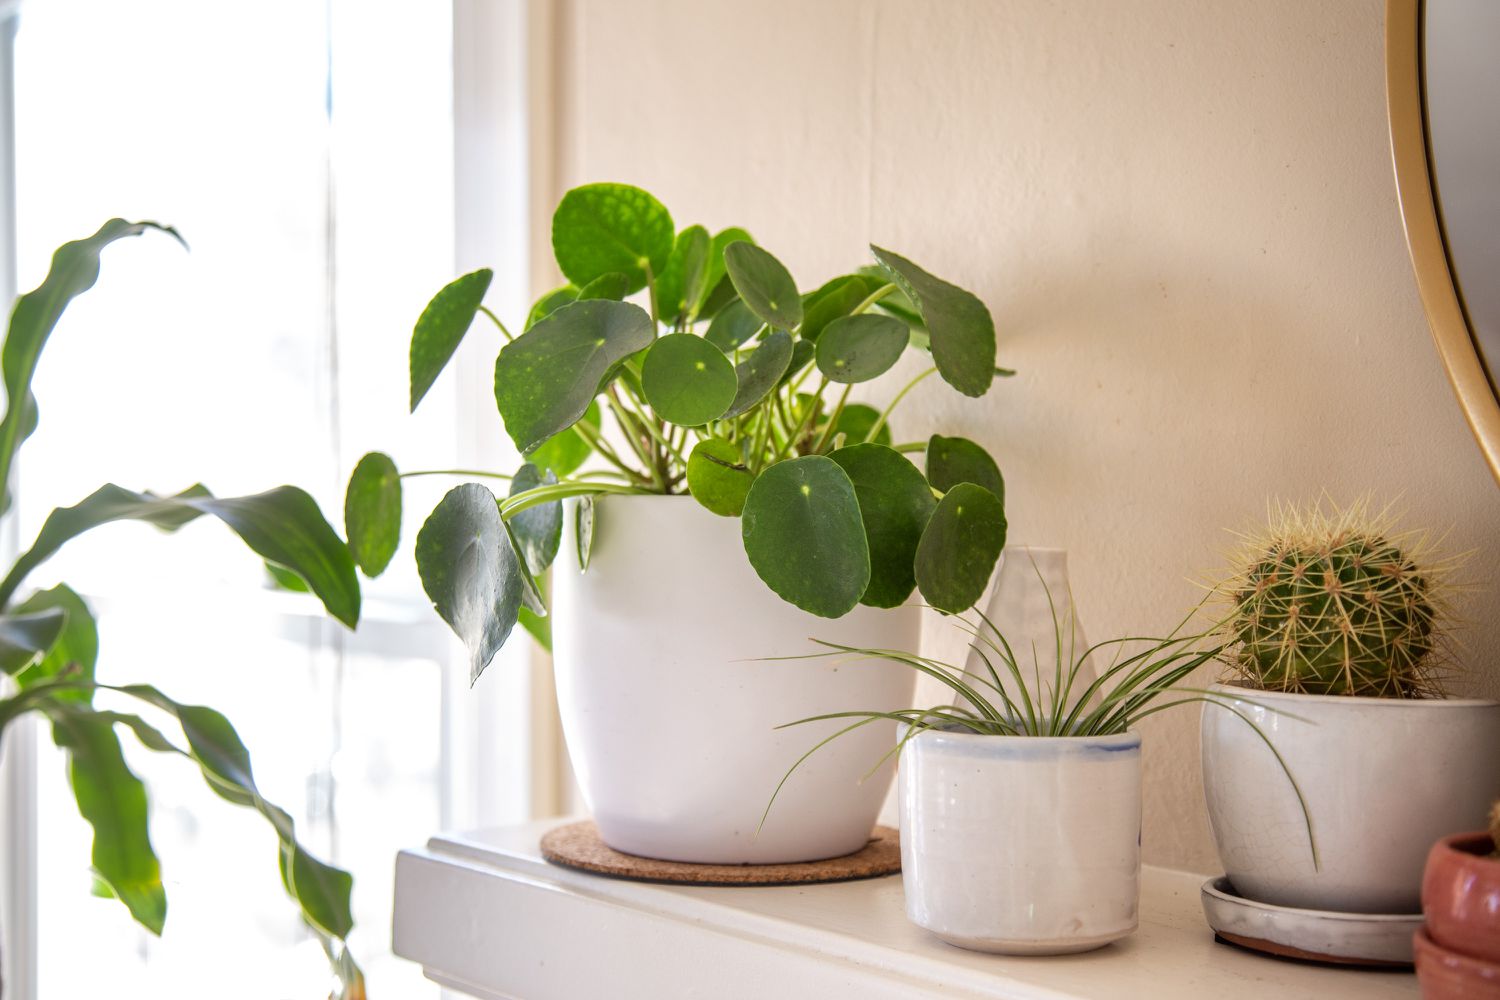 How To Take Care Of A Money Plant